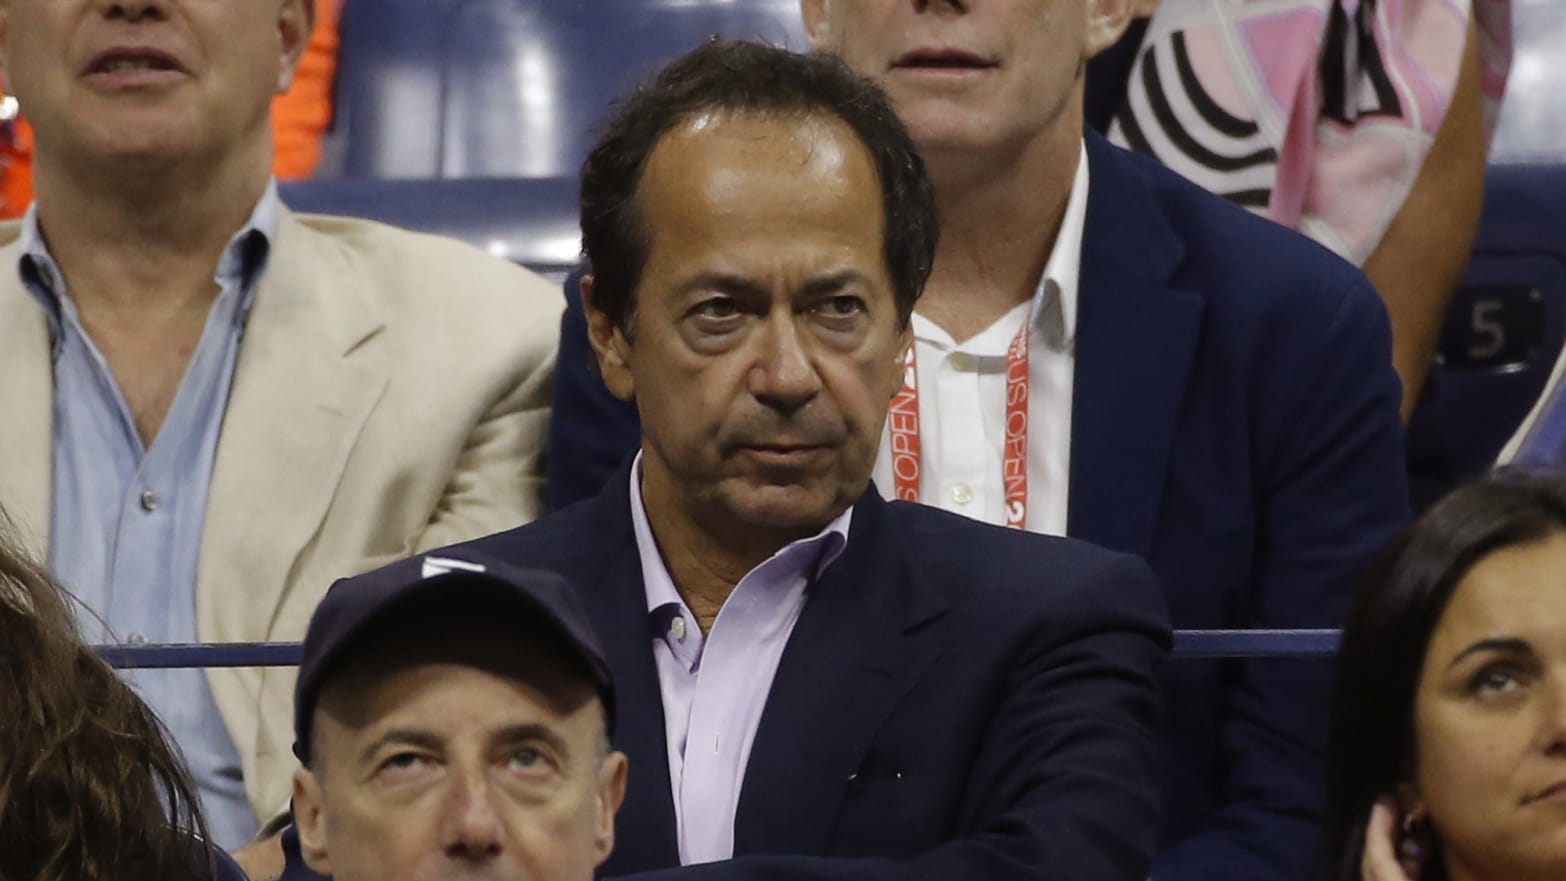 Hedge Fund manager John Paulson attends the men's singles final match of the U.S. Open in New York